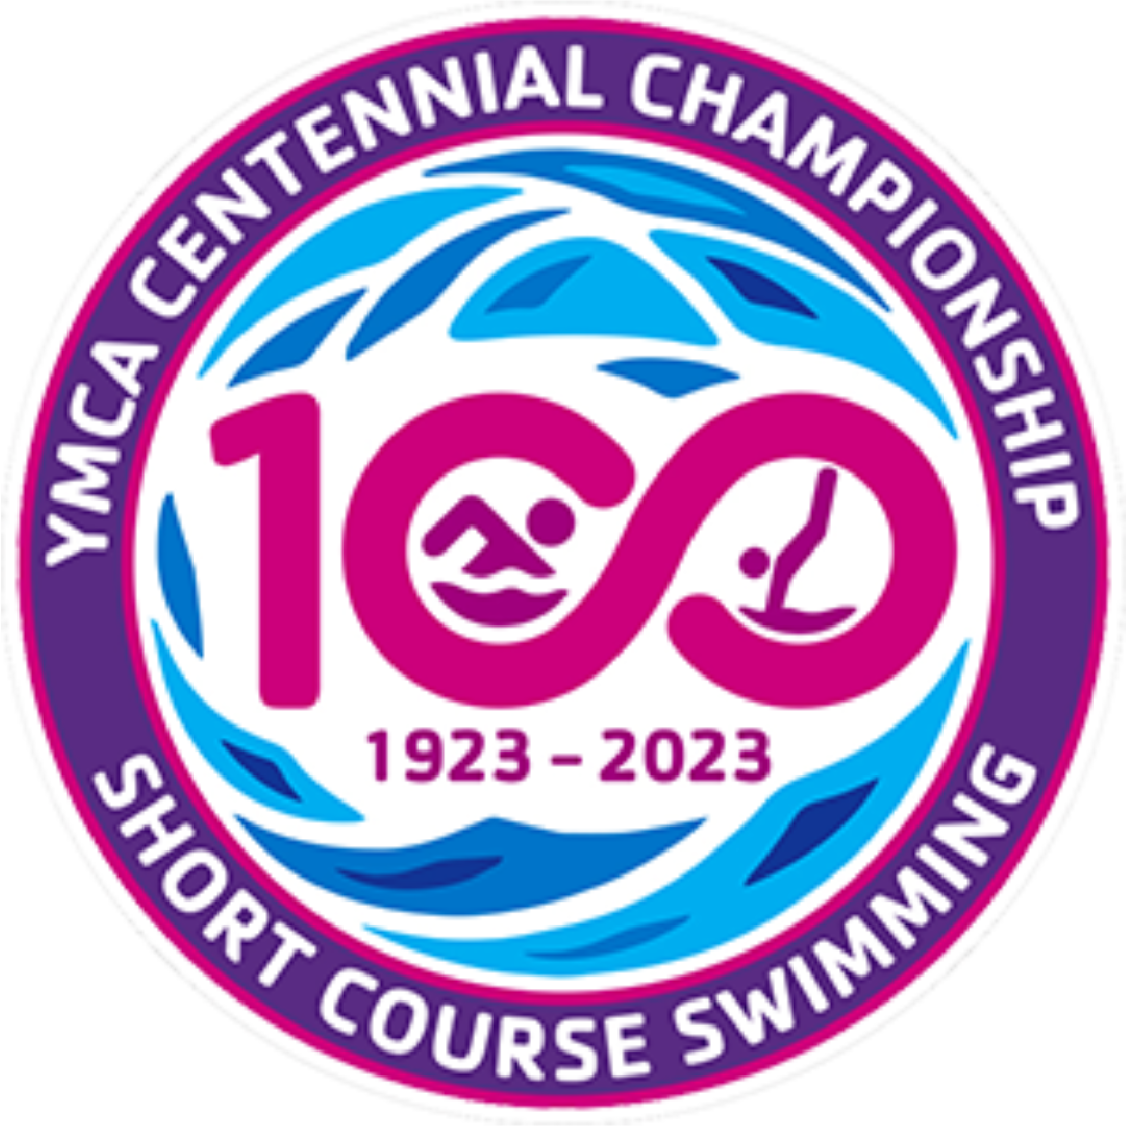 Celebrating the 100th Anniversary of the YMCA National Short Course